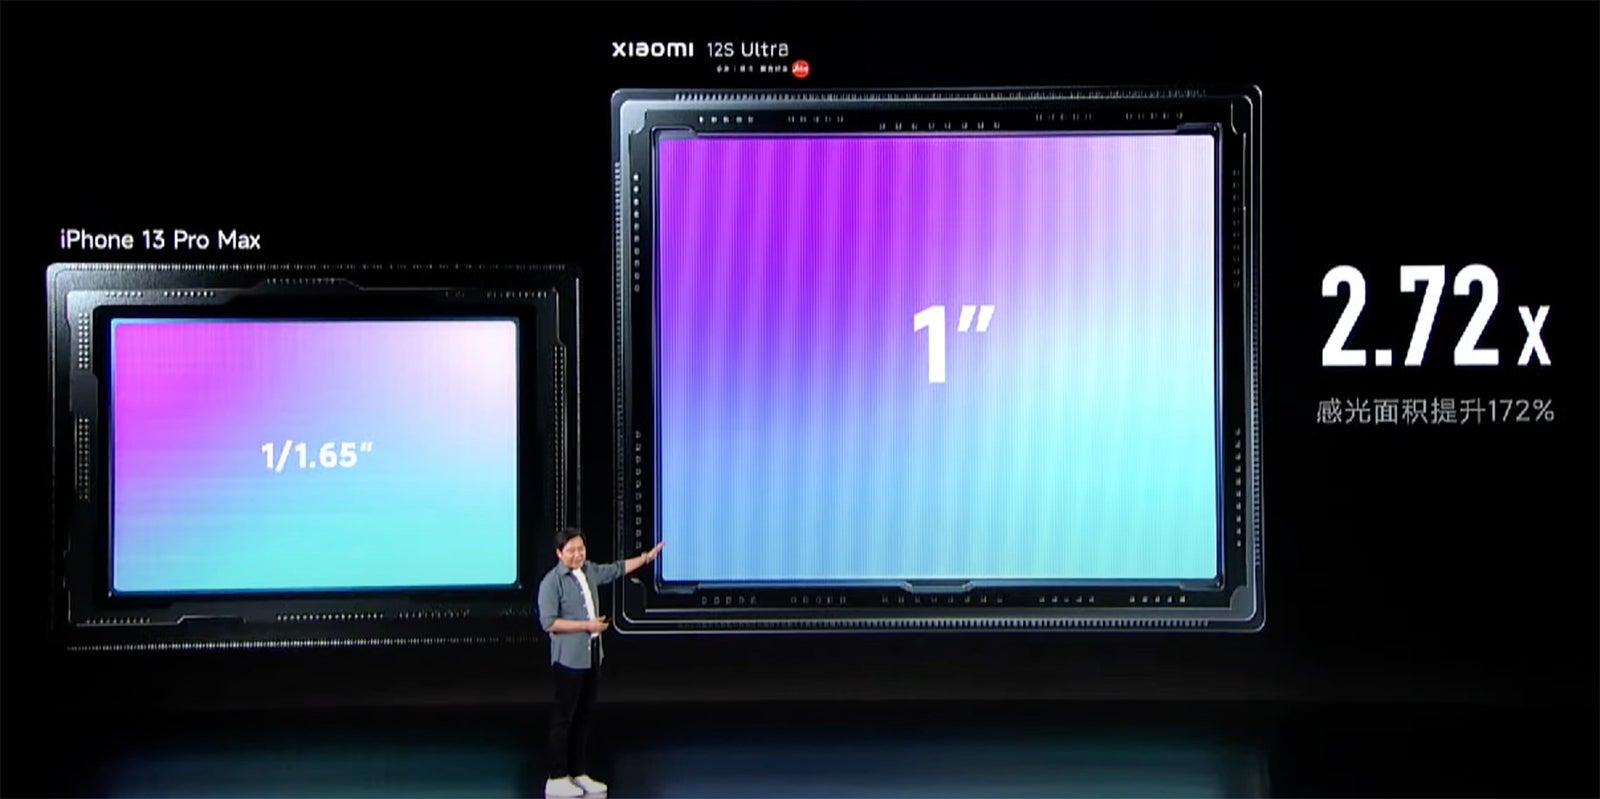 Xiaomi CEO shows how much larger camera sensor is on 12S Ultra vs iPhone - Xiaomi 12S Ultra vs iPhone 13 Pro Max